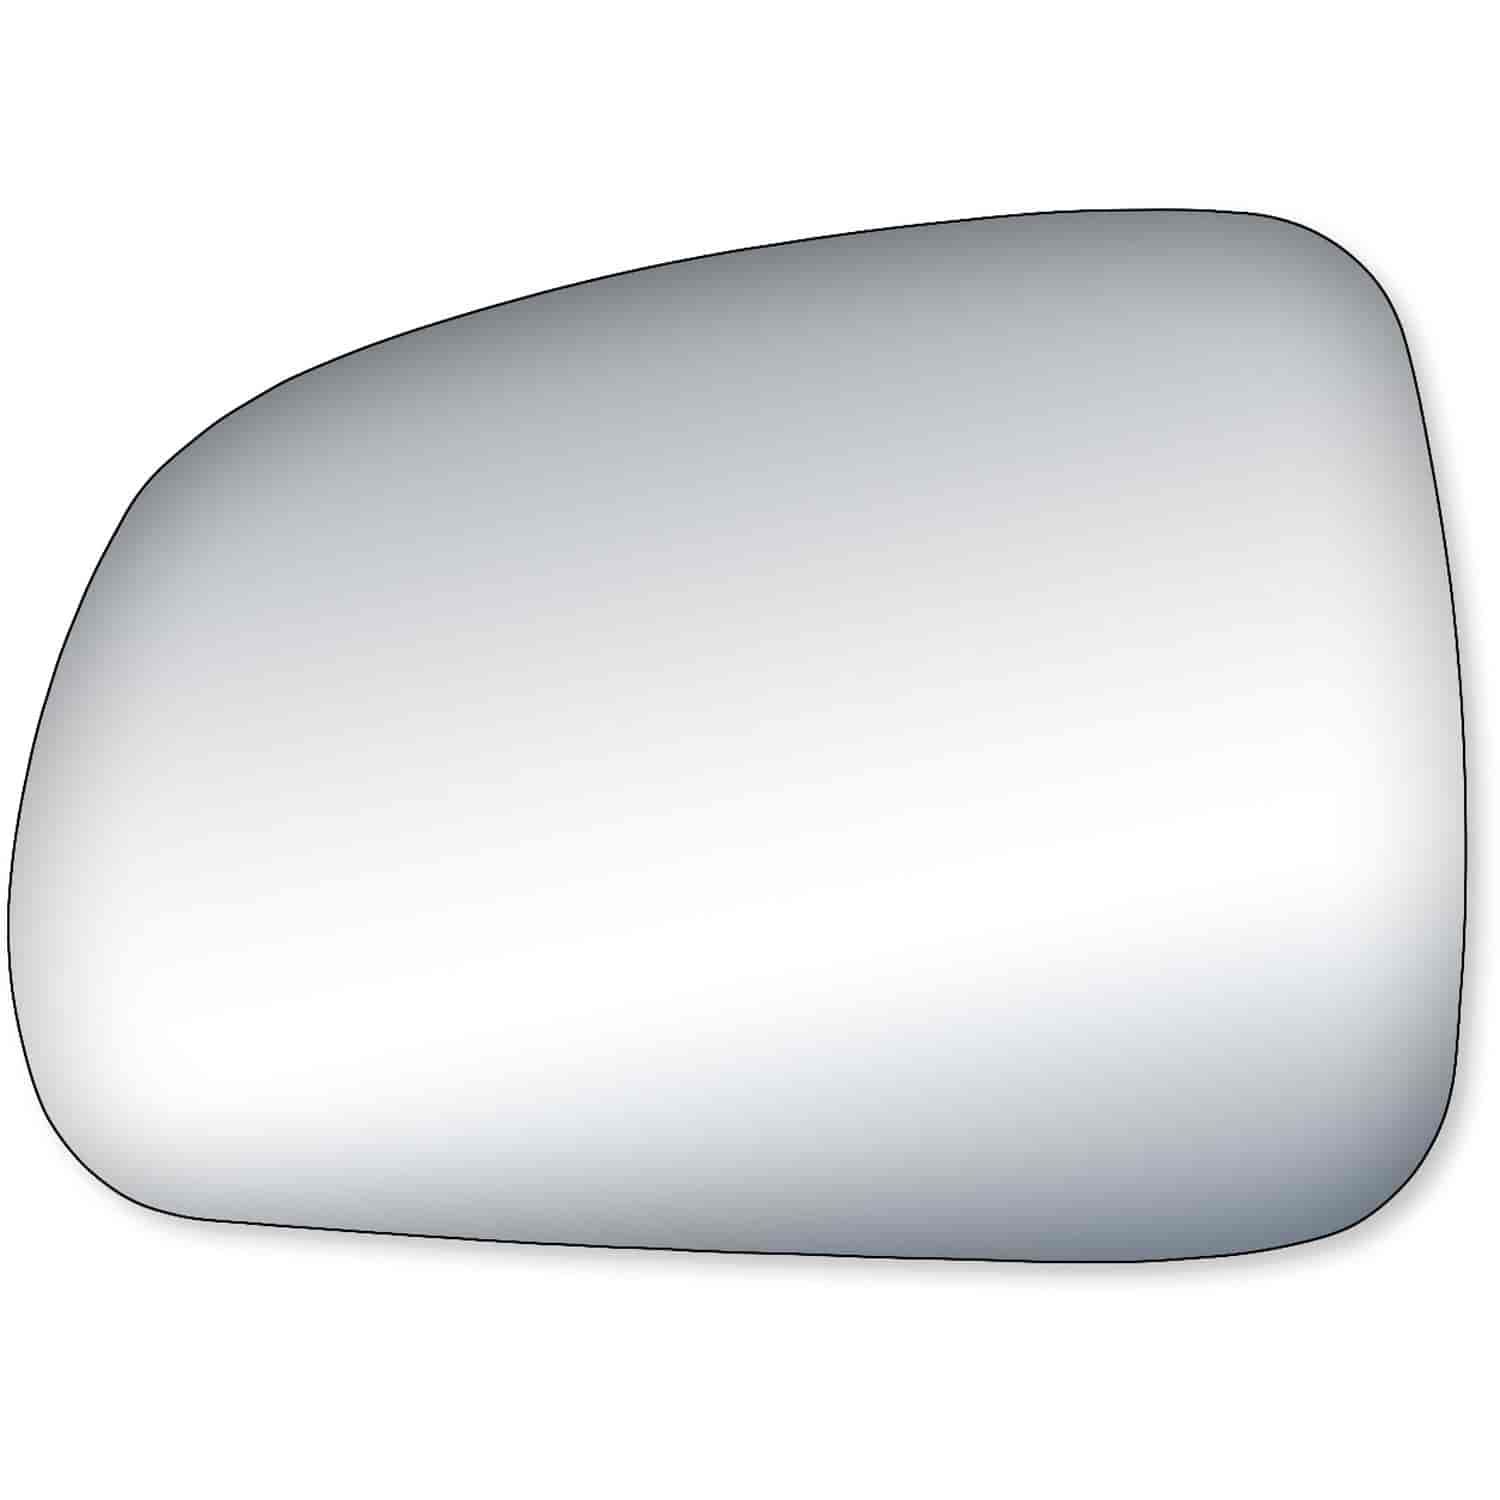 Replacement Glass for 05-08 Grand Prix the glass measures 5 1/8 tall by 7 1/16 wide and 7 3/4 diagon